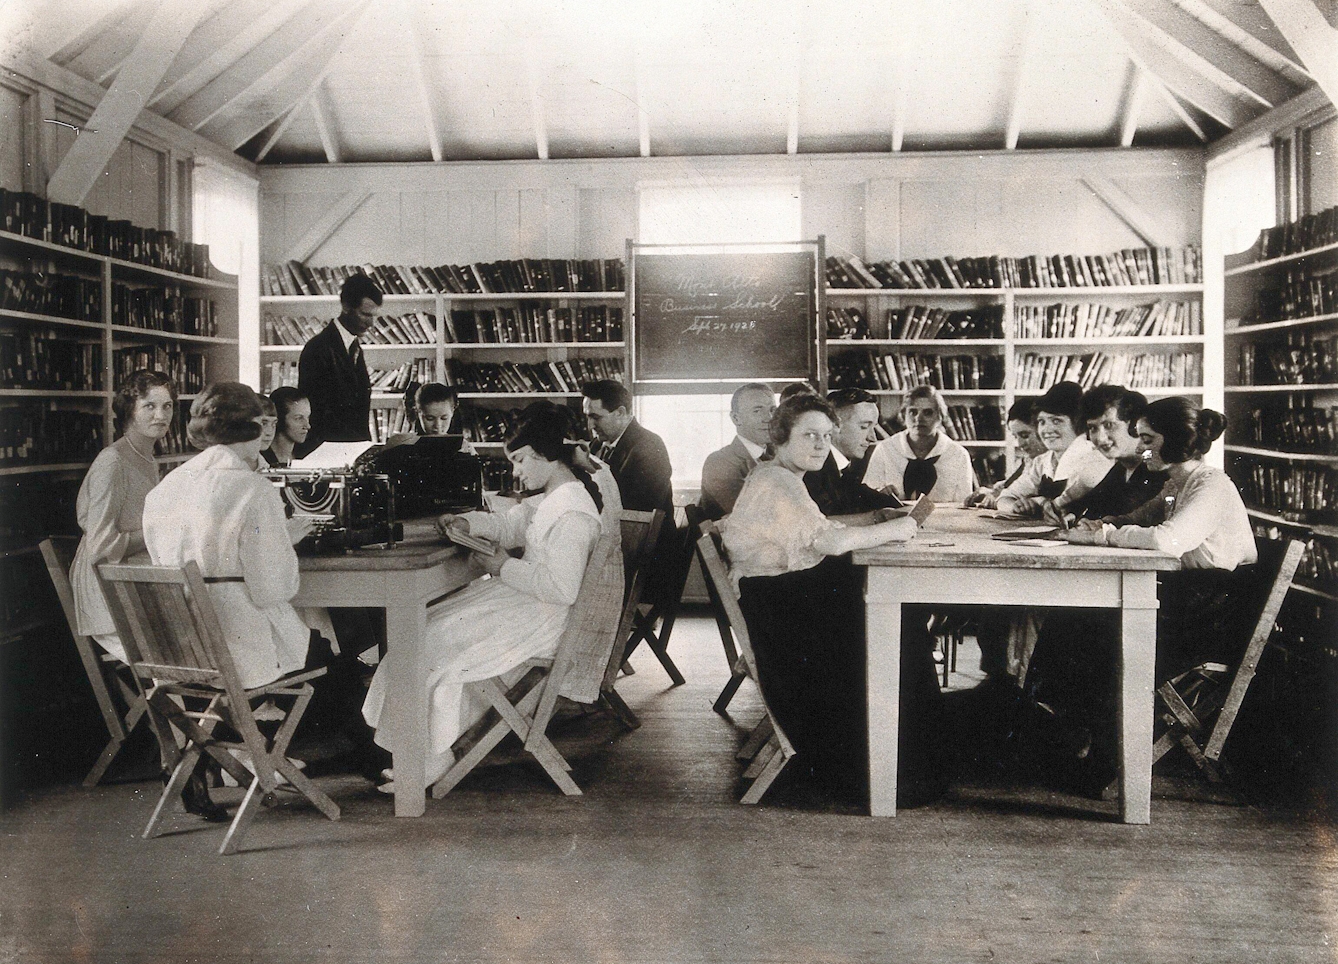 Black and white photograph of the interior of a room lined with bookshelves and a blackboard. Seated around the two large tables in the room are lots of people with books and typewriters, some looking up at the camera.